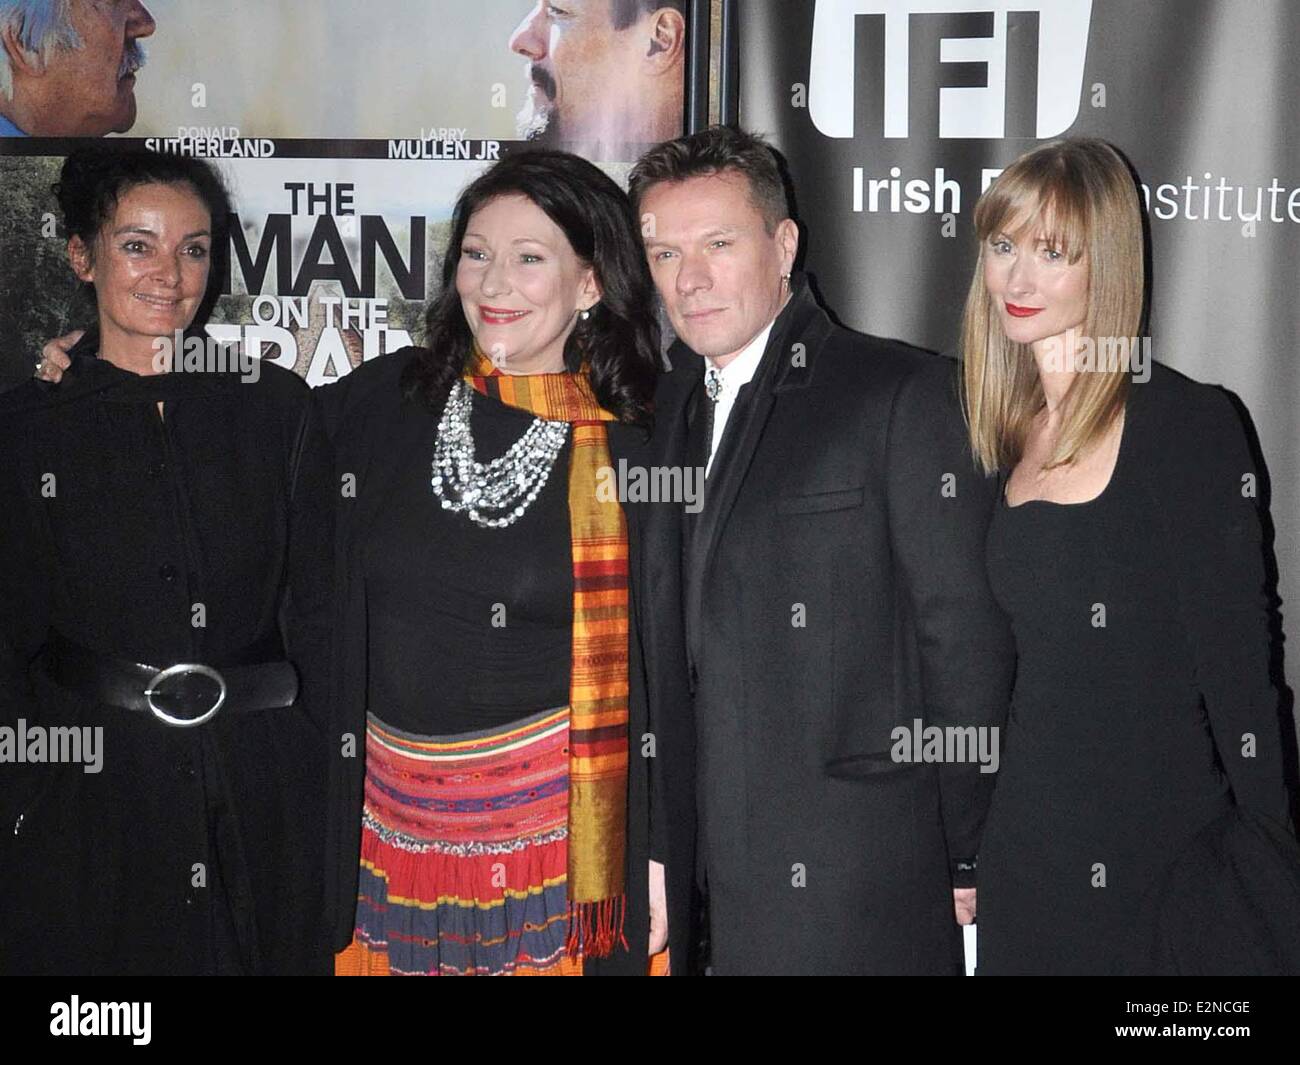 Opening night of 'Man on the Train', a film starring U2 drummer Larry Mullen Jr., held at the IFI in Dublin  Featuring: Mary McGuckian,Kate O'Toole,Larry Mullen Jr.,Ann Acheson Where: Dublin, Ireland When: 11 Jan 2013   **Not available for publication in Irish Tabloids or Irish magazines** Stock Photo